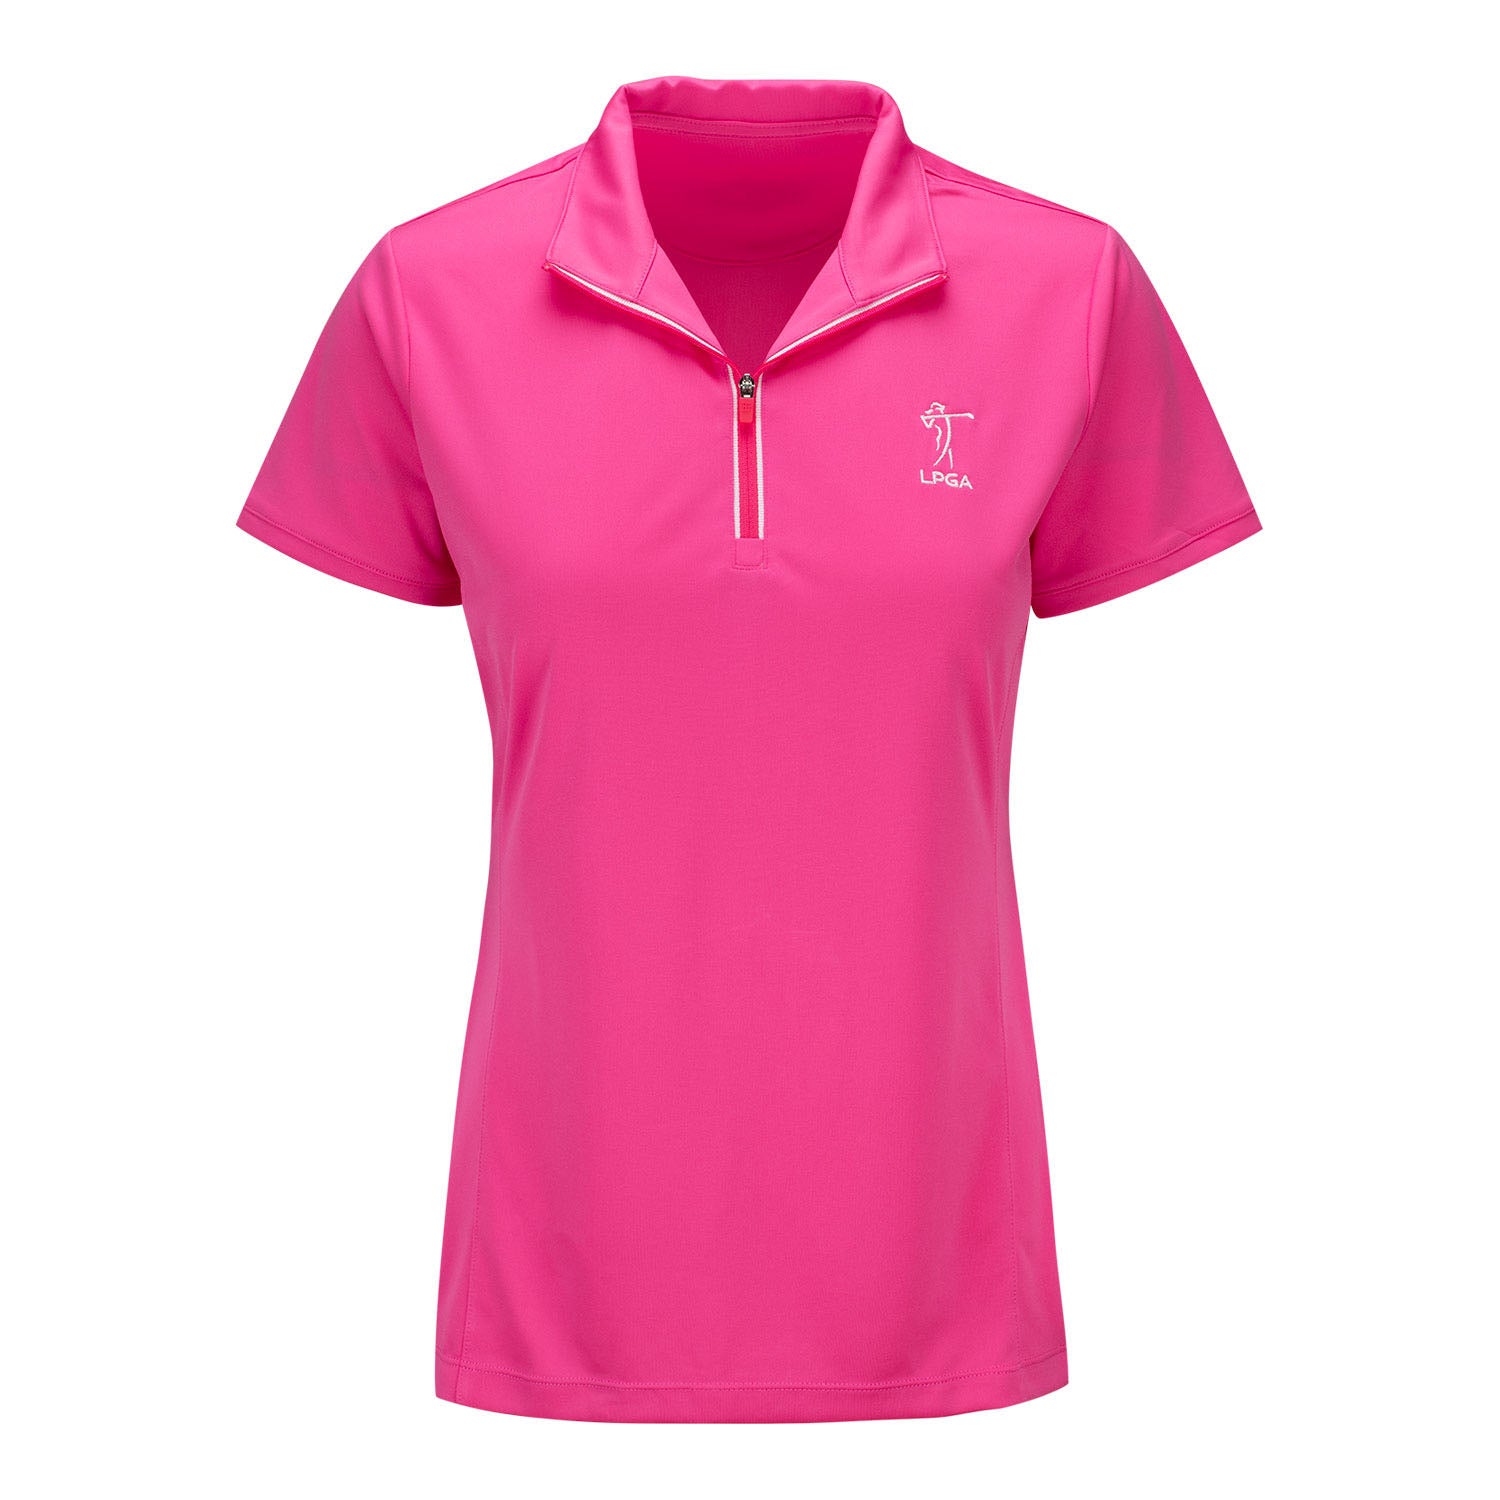 EP Pro 2023 LPGA Golf Short Sleeve Convertible Zip Polo in Pink - Front View